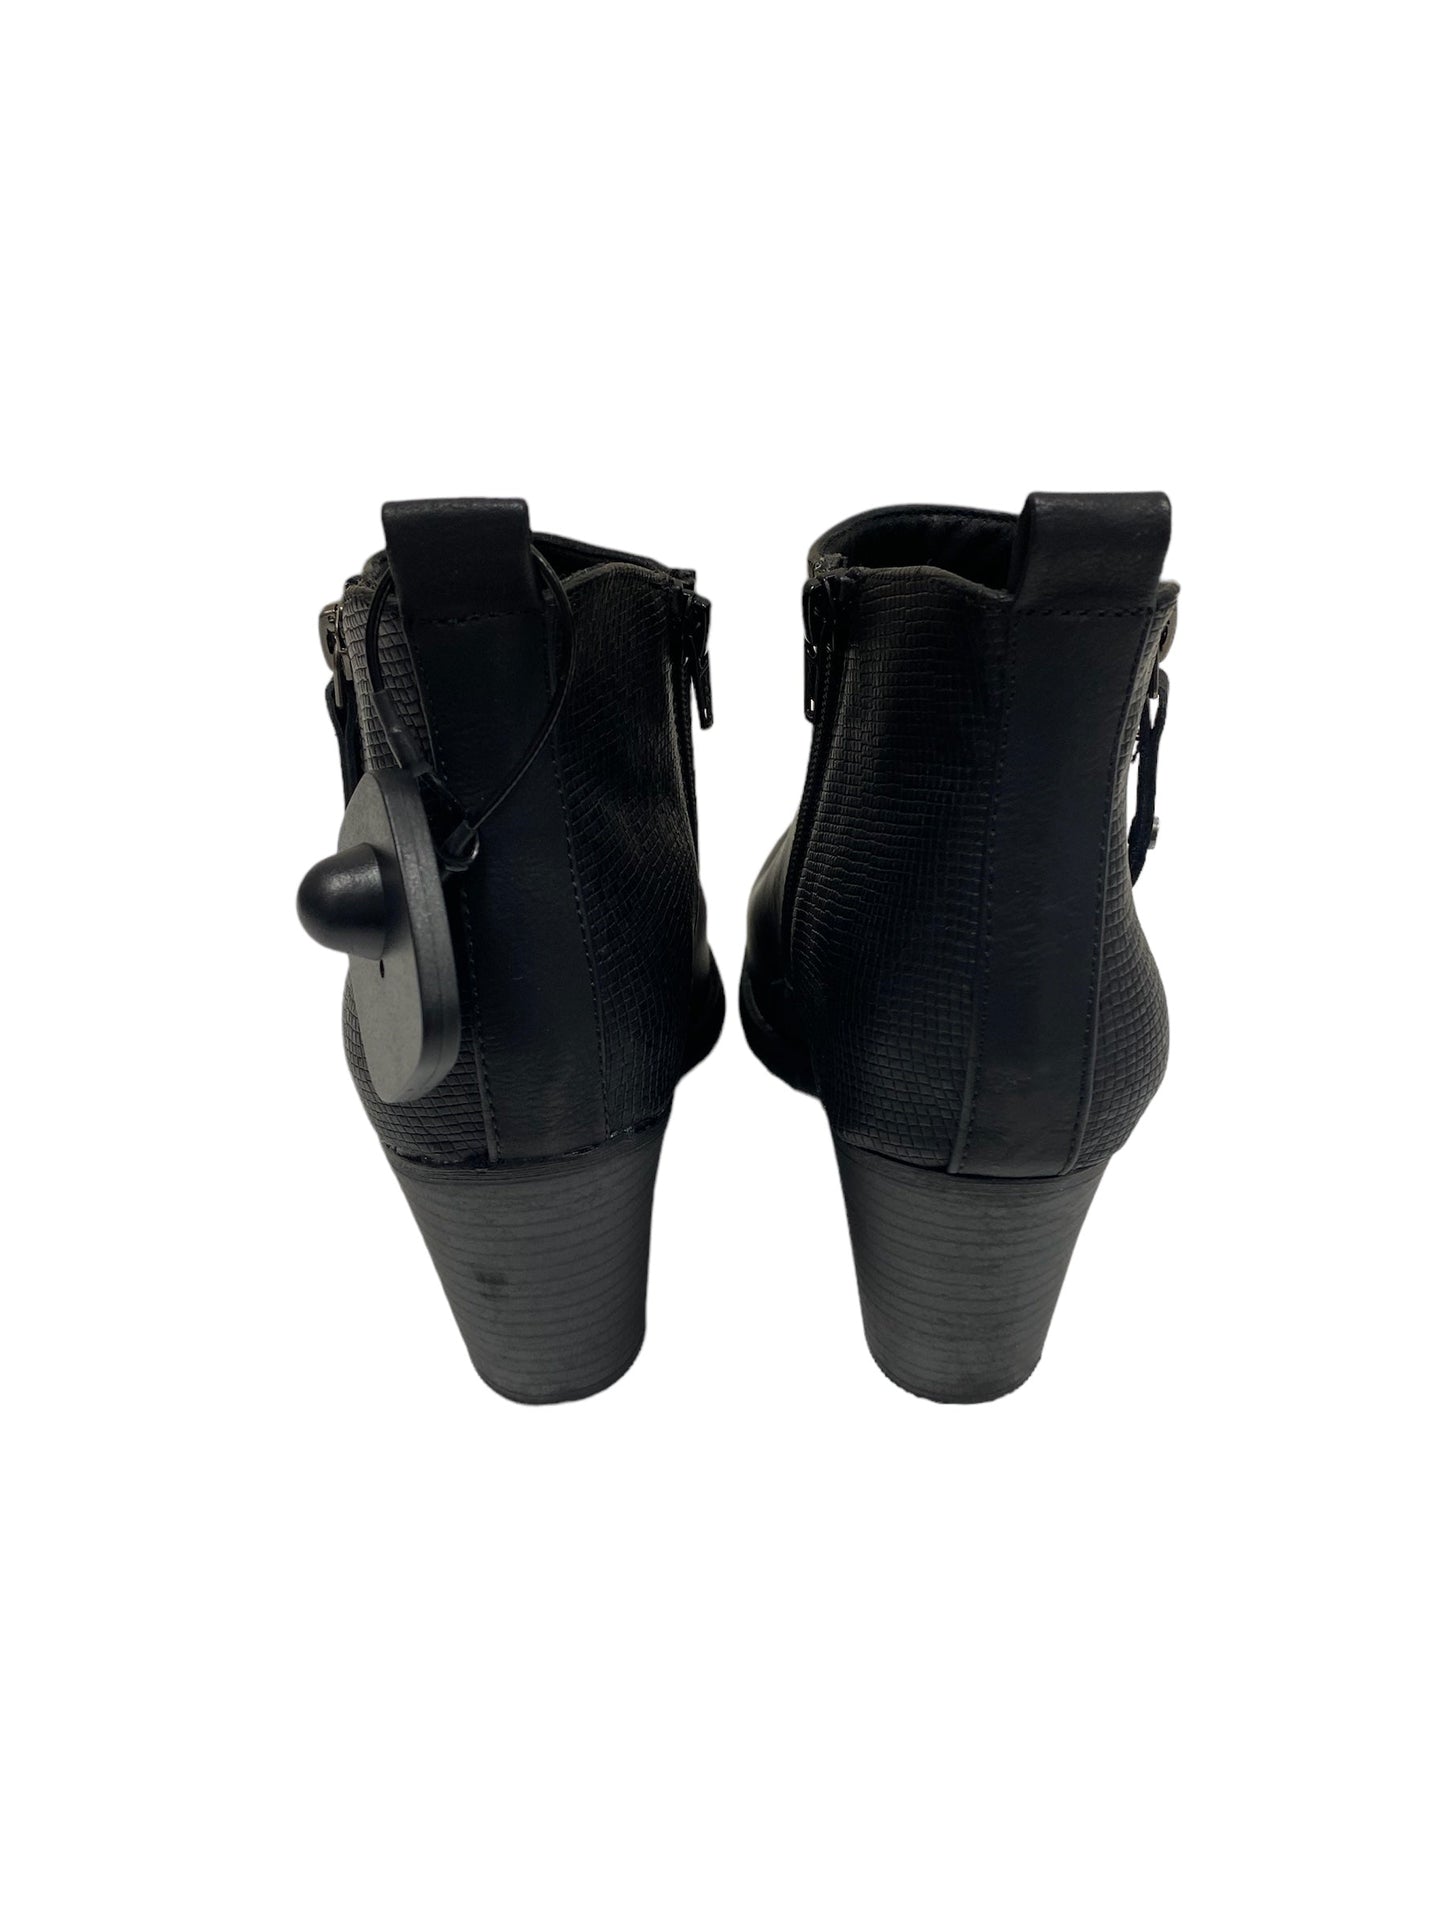 Boots Mid-calf Heels By Universal Thread  Size: 6